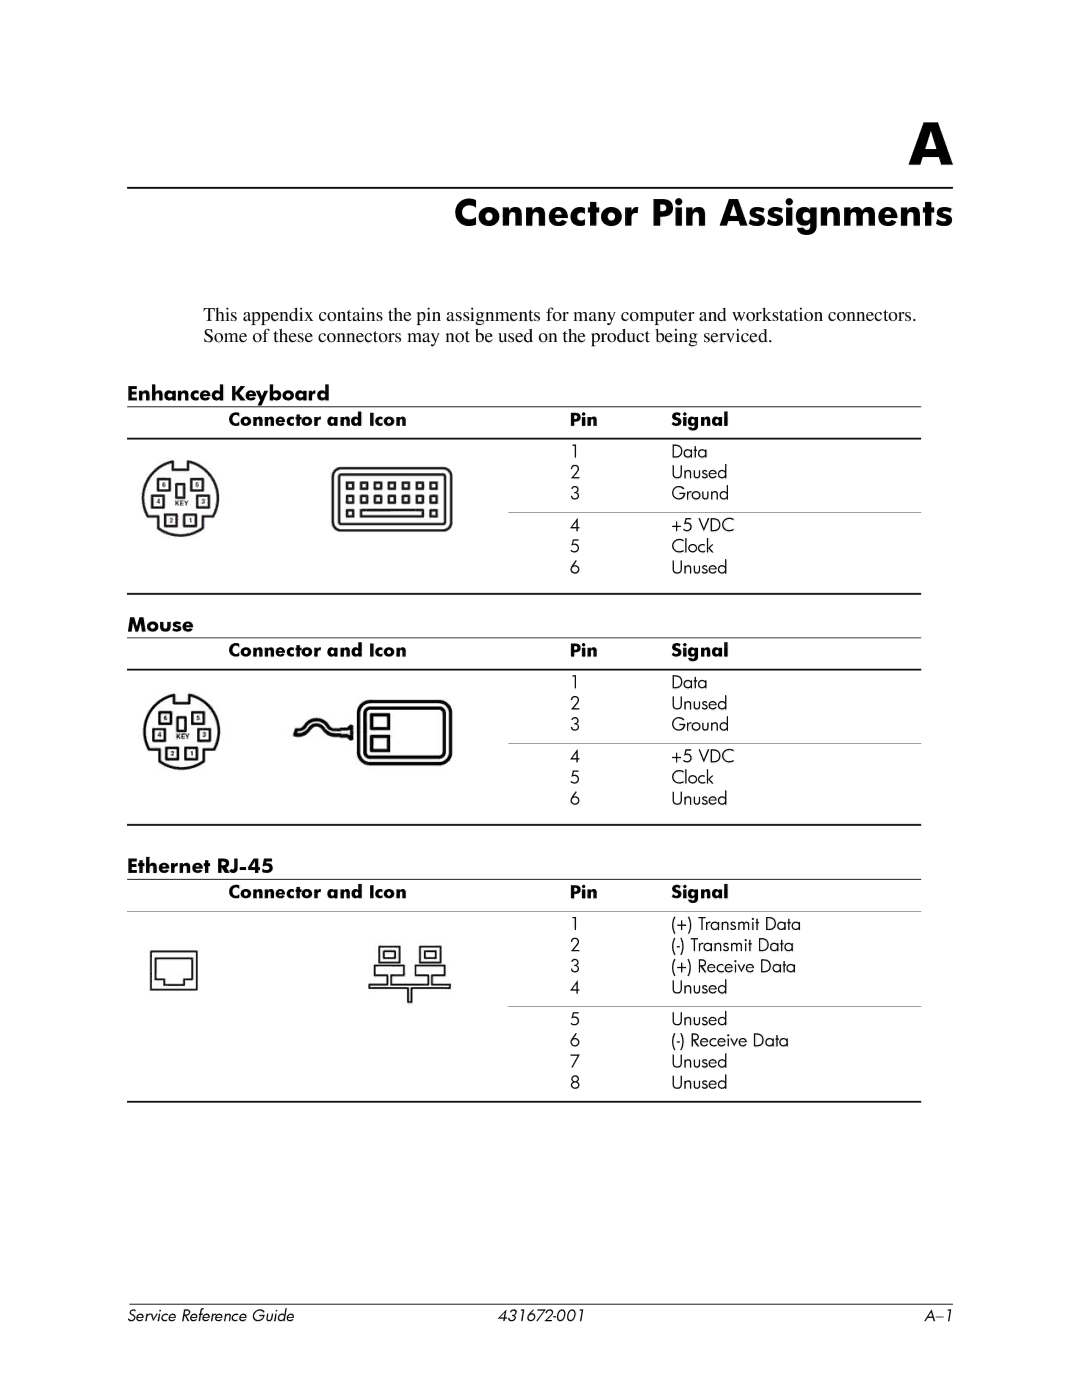 HP dx2700 manual Connector Pin Assignments, Enhanced Keyboard, Mouse, Ethernet RJ-45, Connector and Icon Pin Signal 